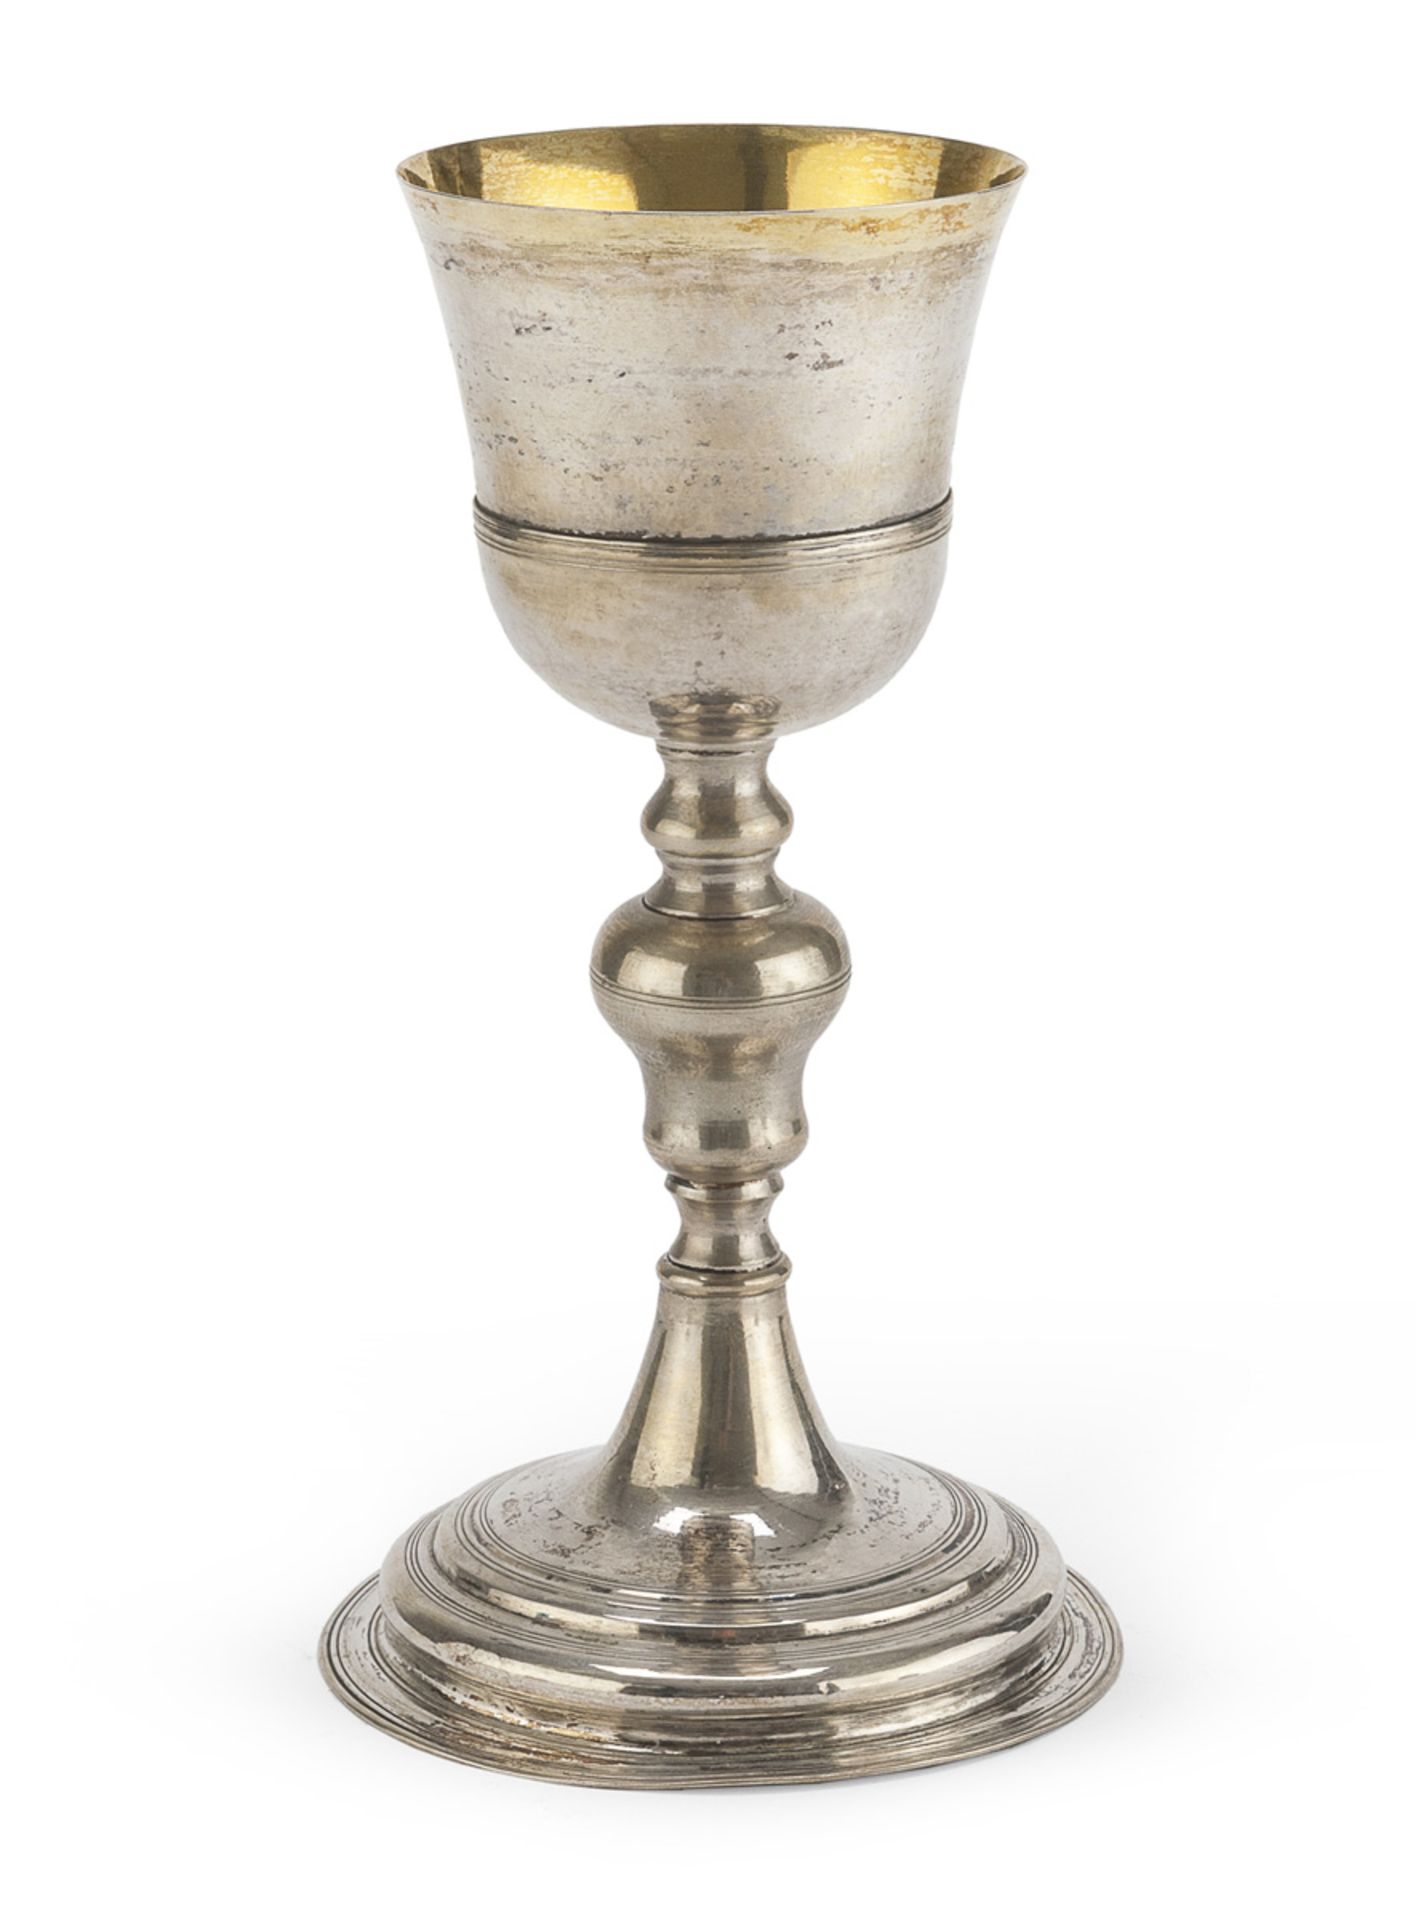 SILVER COMMUNION CUP PROBABLY KINGDOM OF ITALY LATE 19TH CENTURY